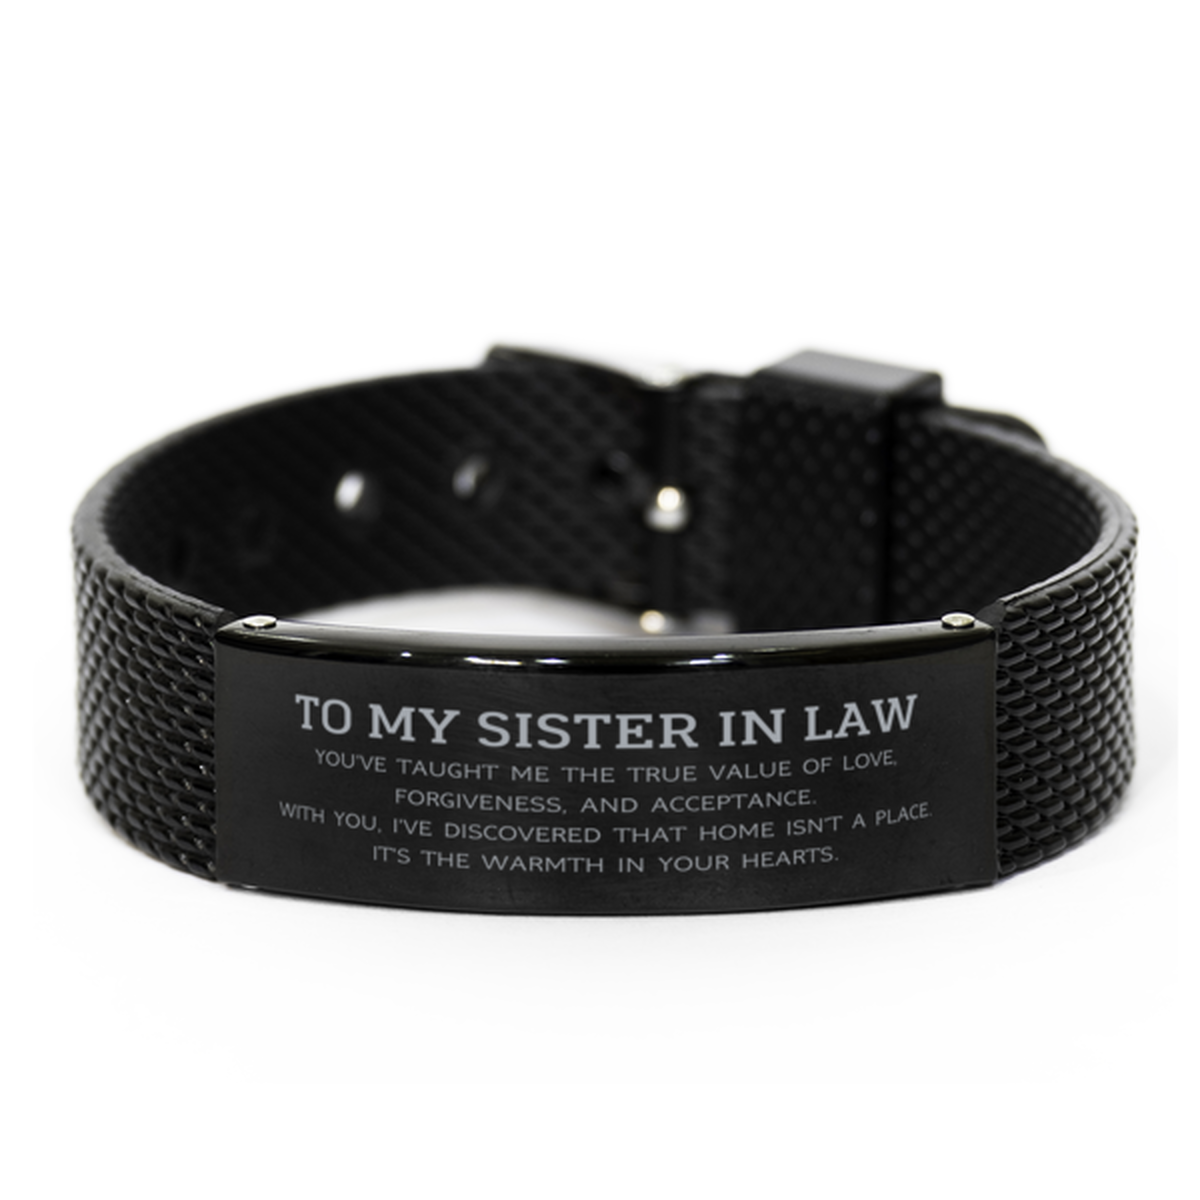 To My Sister In Law Gifts, You've taught me the true value of love, Thank You Gifts For Sister In Law, Birthday Black Shark Mesh Bracelet For Sister In Law